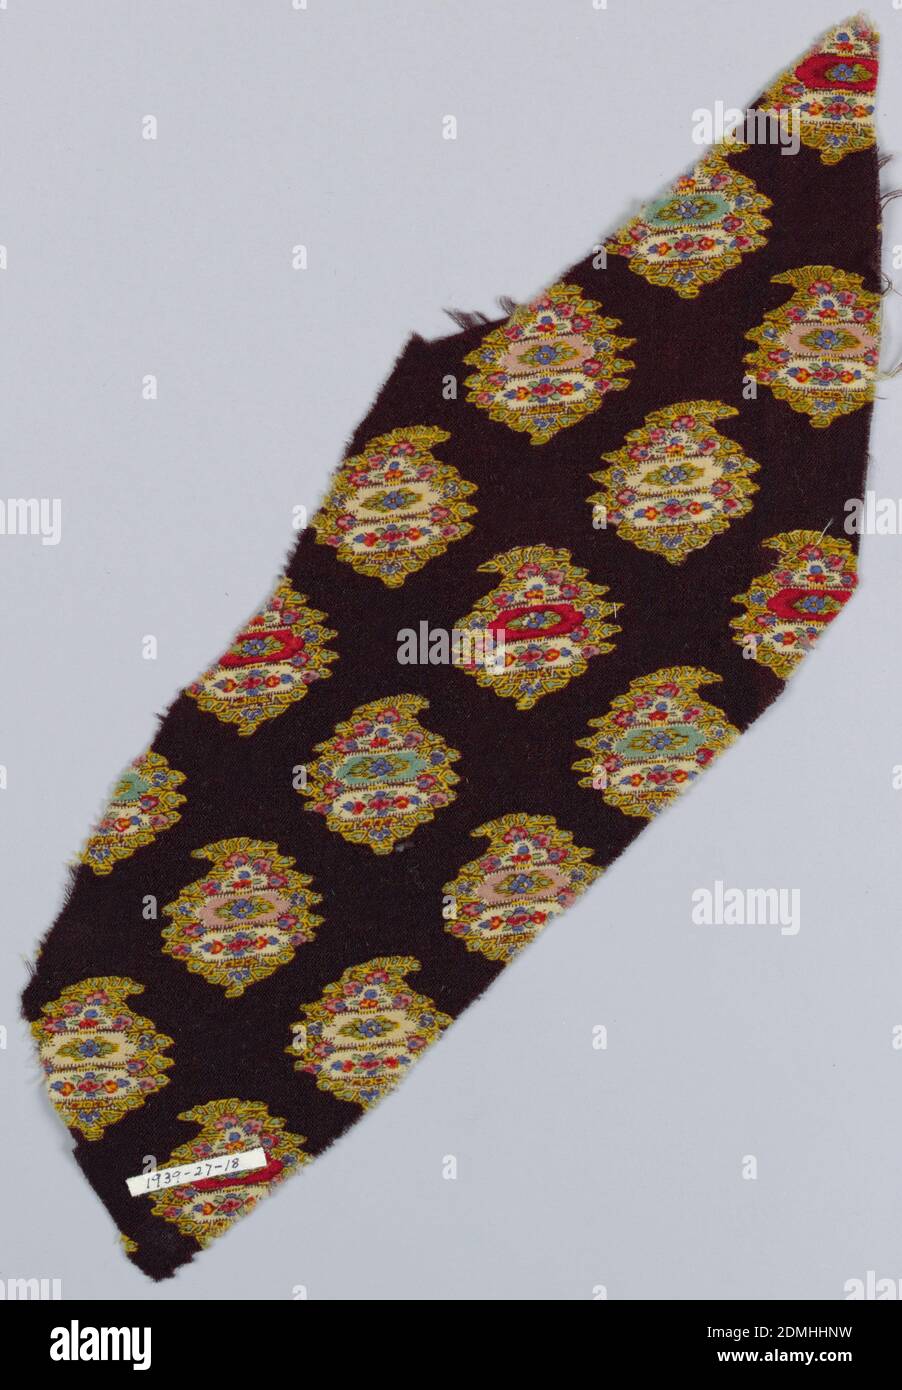 Printed Pattern High Resolution Stock Photography and Images - Alamy